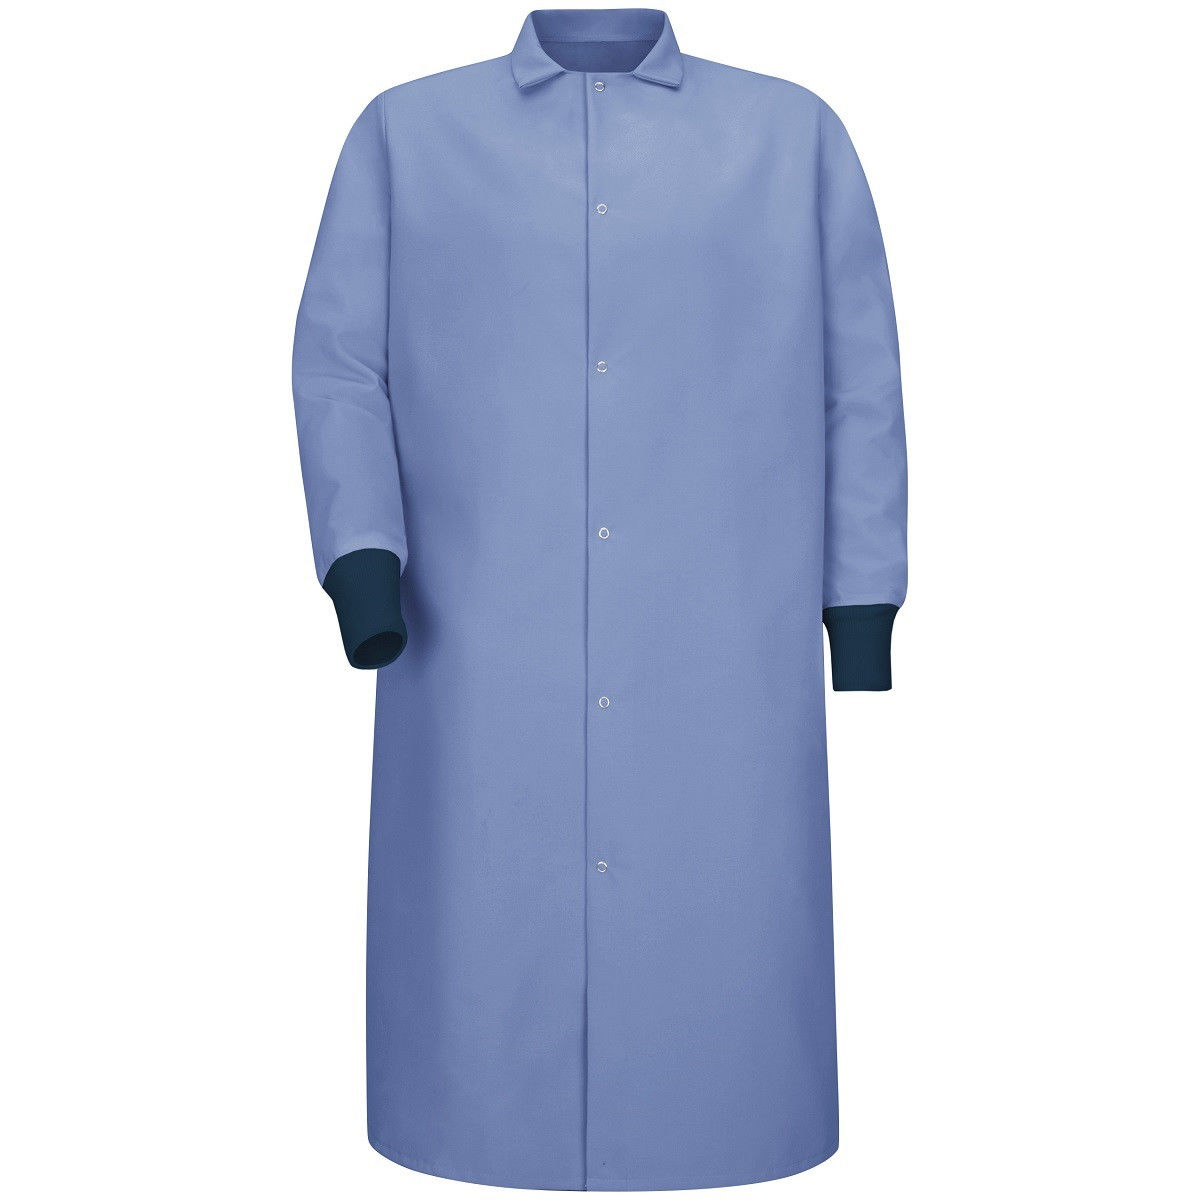 Can you provide more specifics about the Red Kap KS60LB butcher coat?